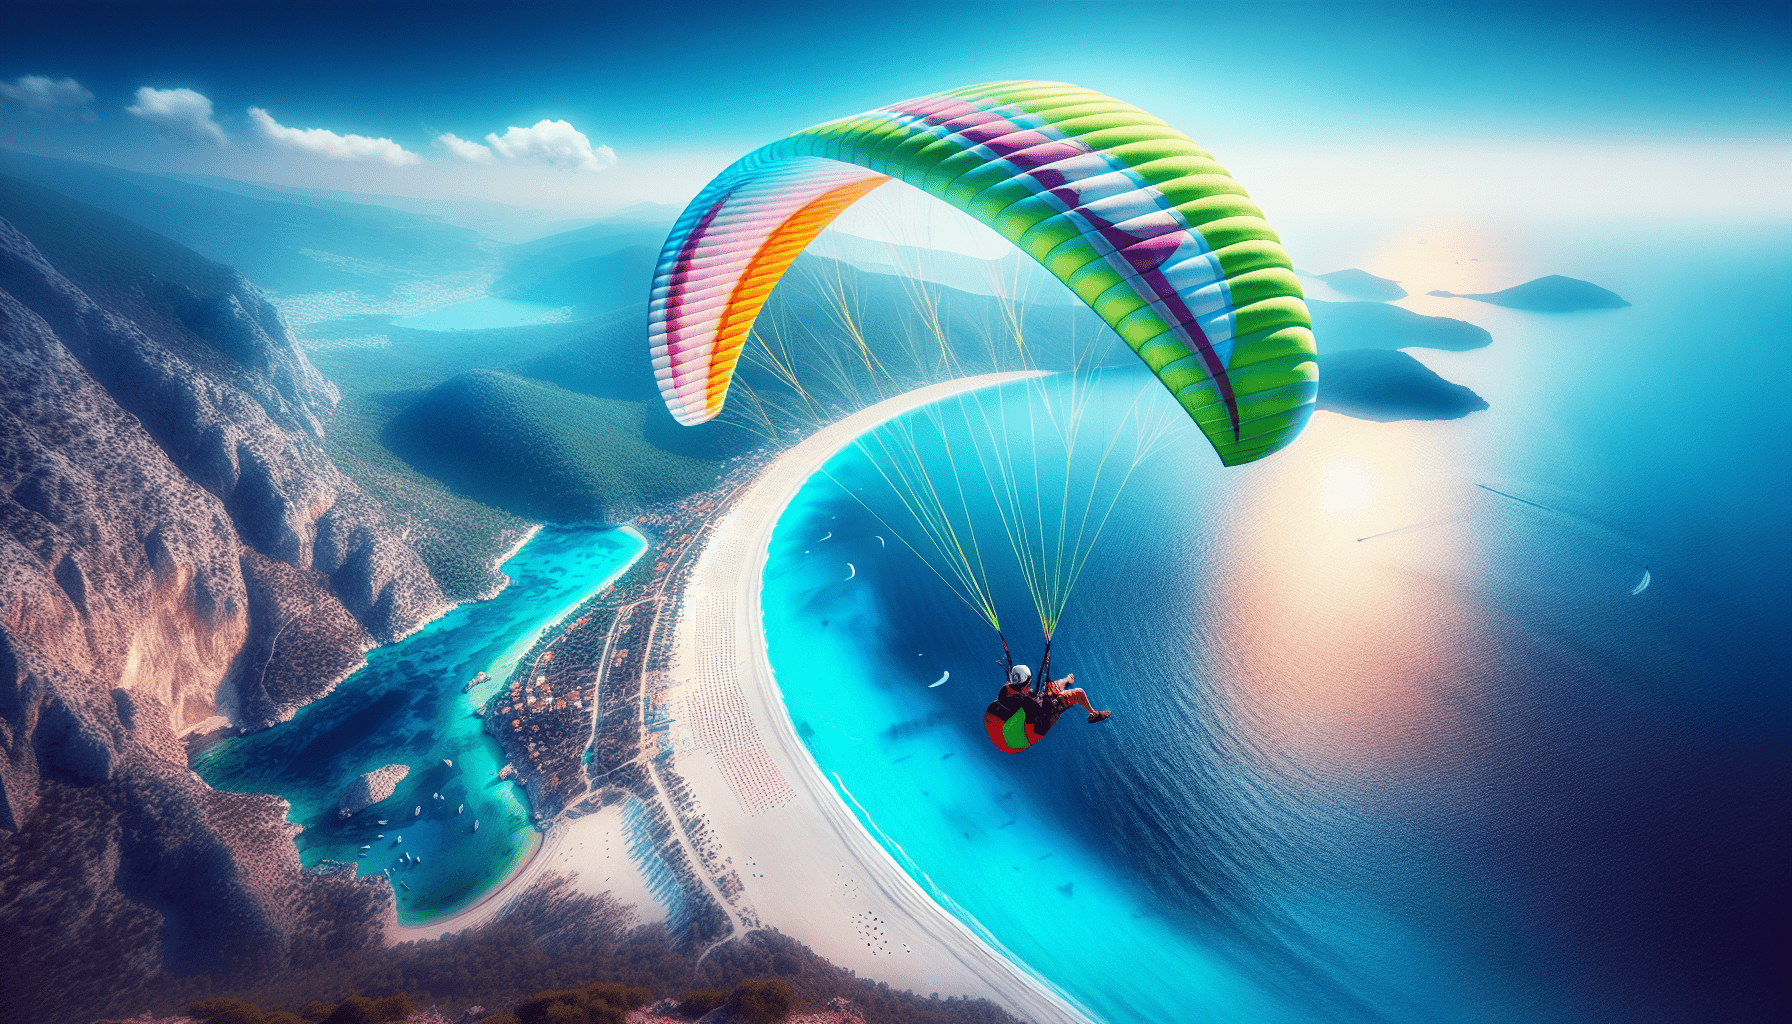 A paraglider with a colorful parachute soars over a stunning coastal landscape in Turkey, featuring a turquoise bay, sandy beach, and rugged cliffs under clear skies.